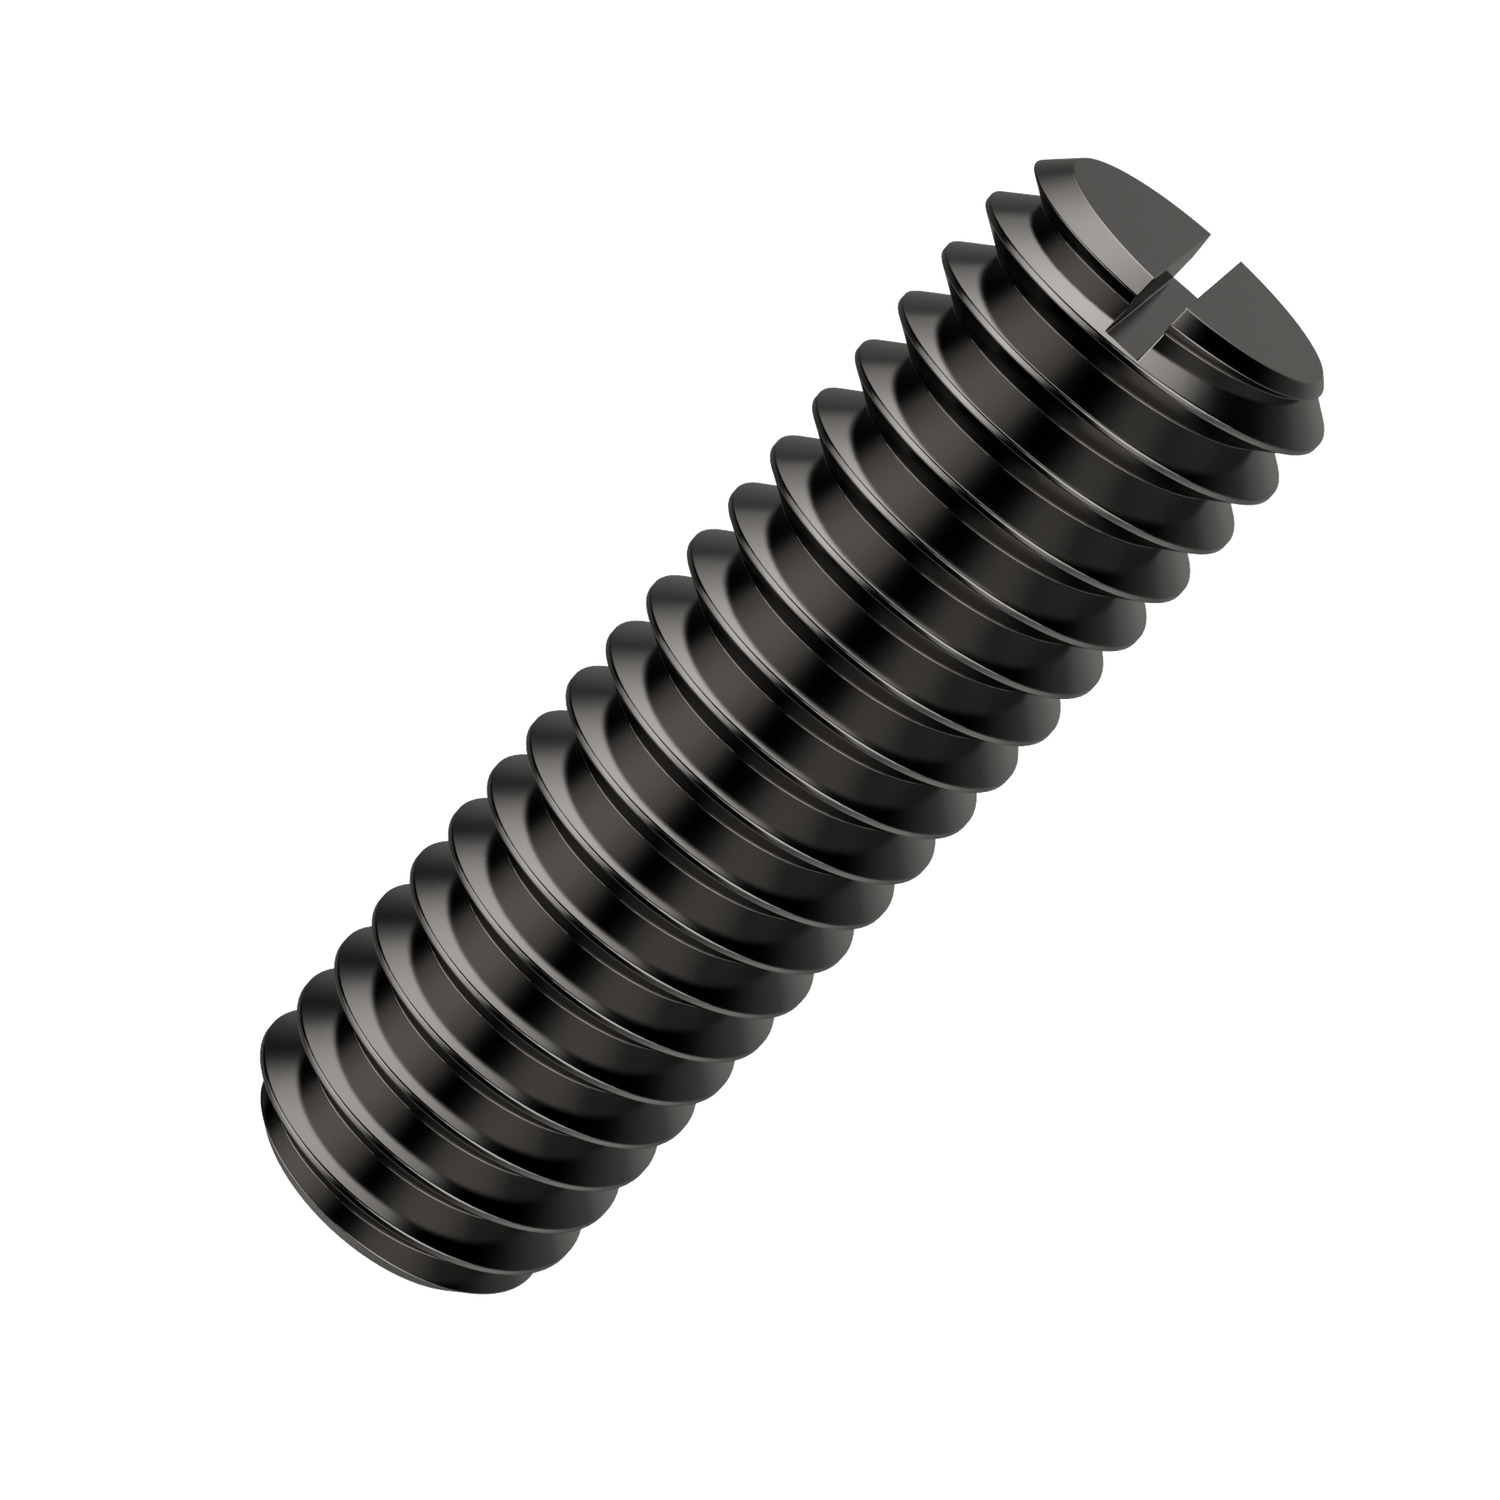 34300.W0063 Threaded rod - WHILE STOCKS LAST! M6 - 35. Please note, supplied in multiples of 10  WHILE STOCKS LAST!